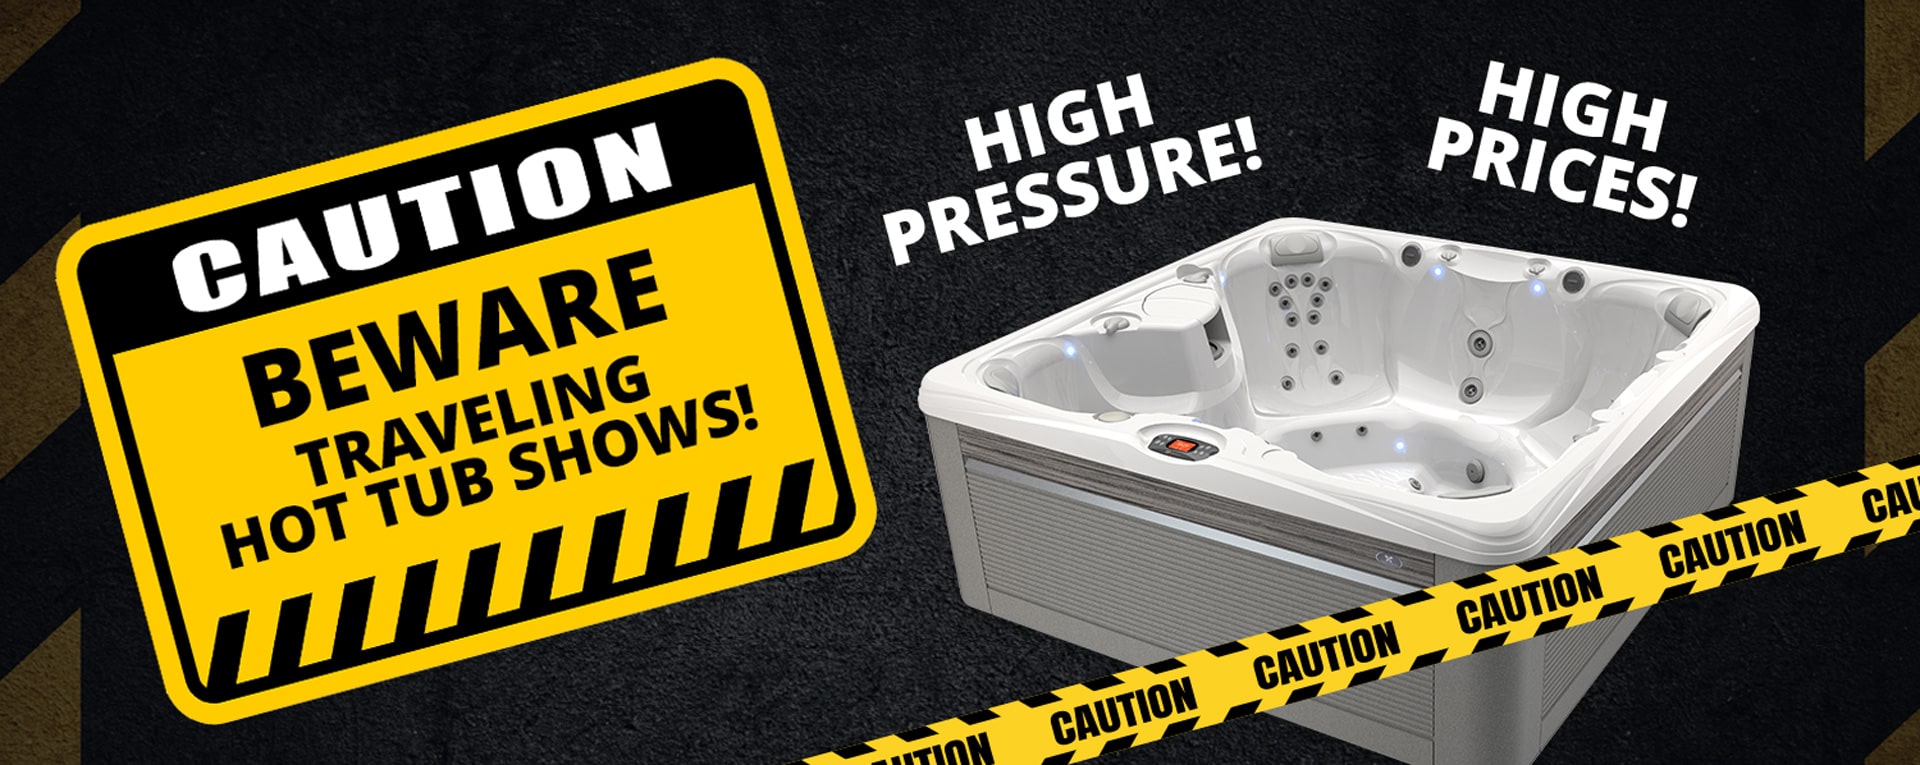 Avoid Traveling Hot Tub Shows